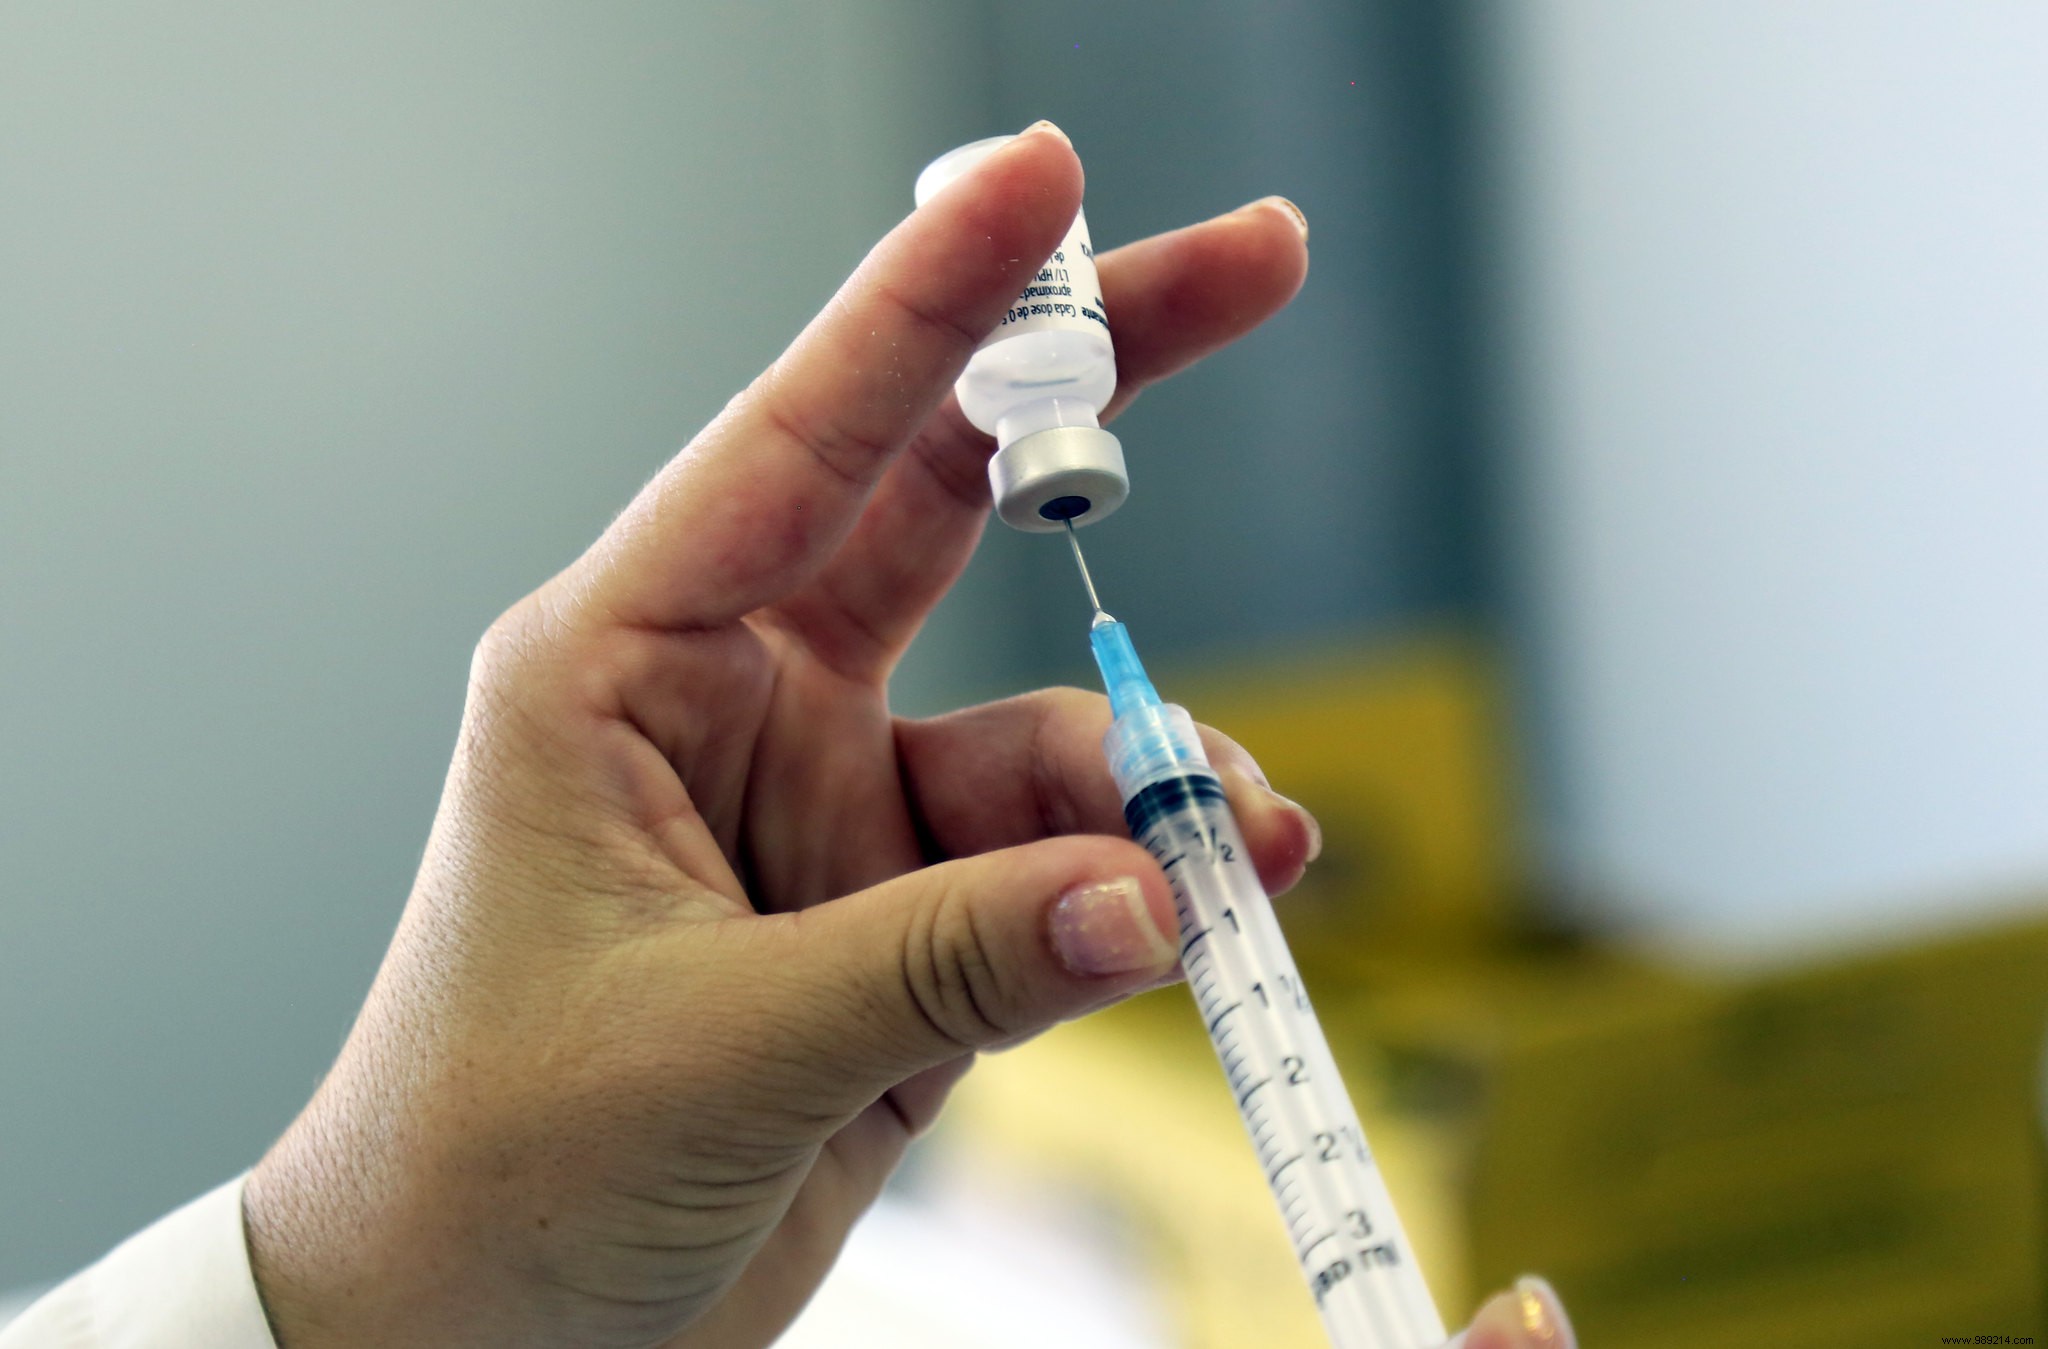 Who will benefit first from the Covid-19 vaccine? 